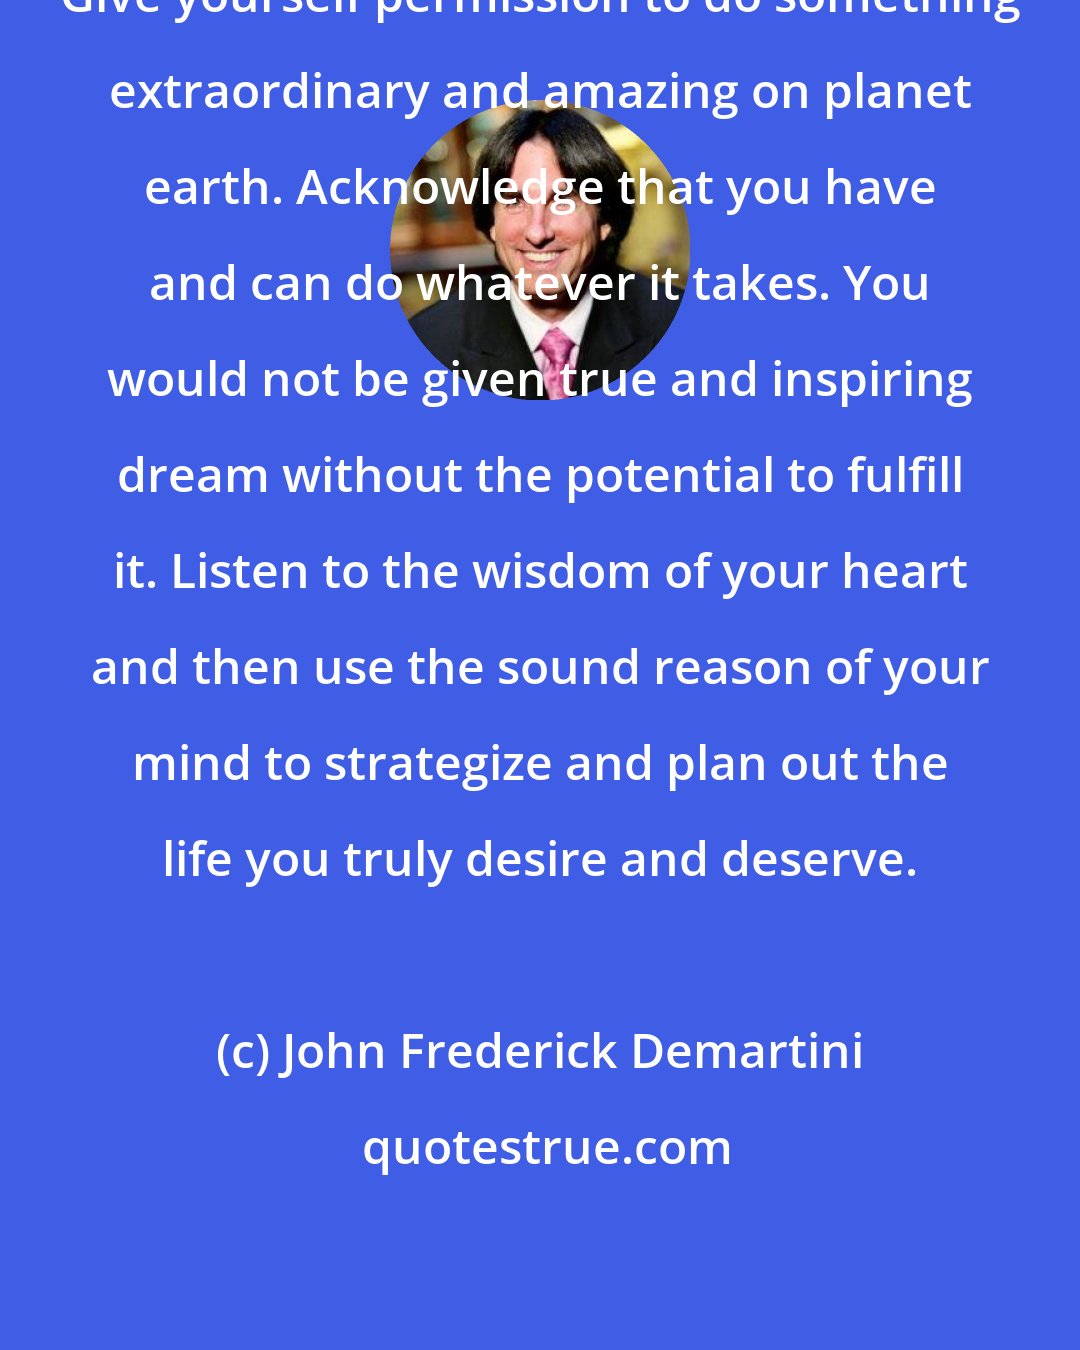 John Frederick Demartini: Give yourself permission to do something extraordinary and amazing on planet earth. Acknowledge that you have and can do whatever it takes. You would not be given true and inspiring dream without the potential to fulfill it. Listen to the wisdom of your heart and then use the sound reason of your mind to strategize and plan out the life you truly desire and deserve.